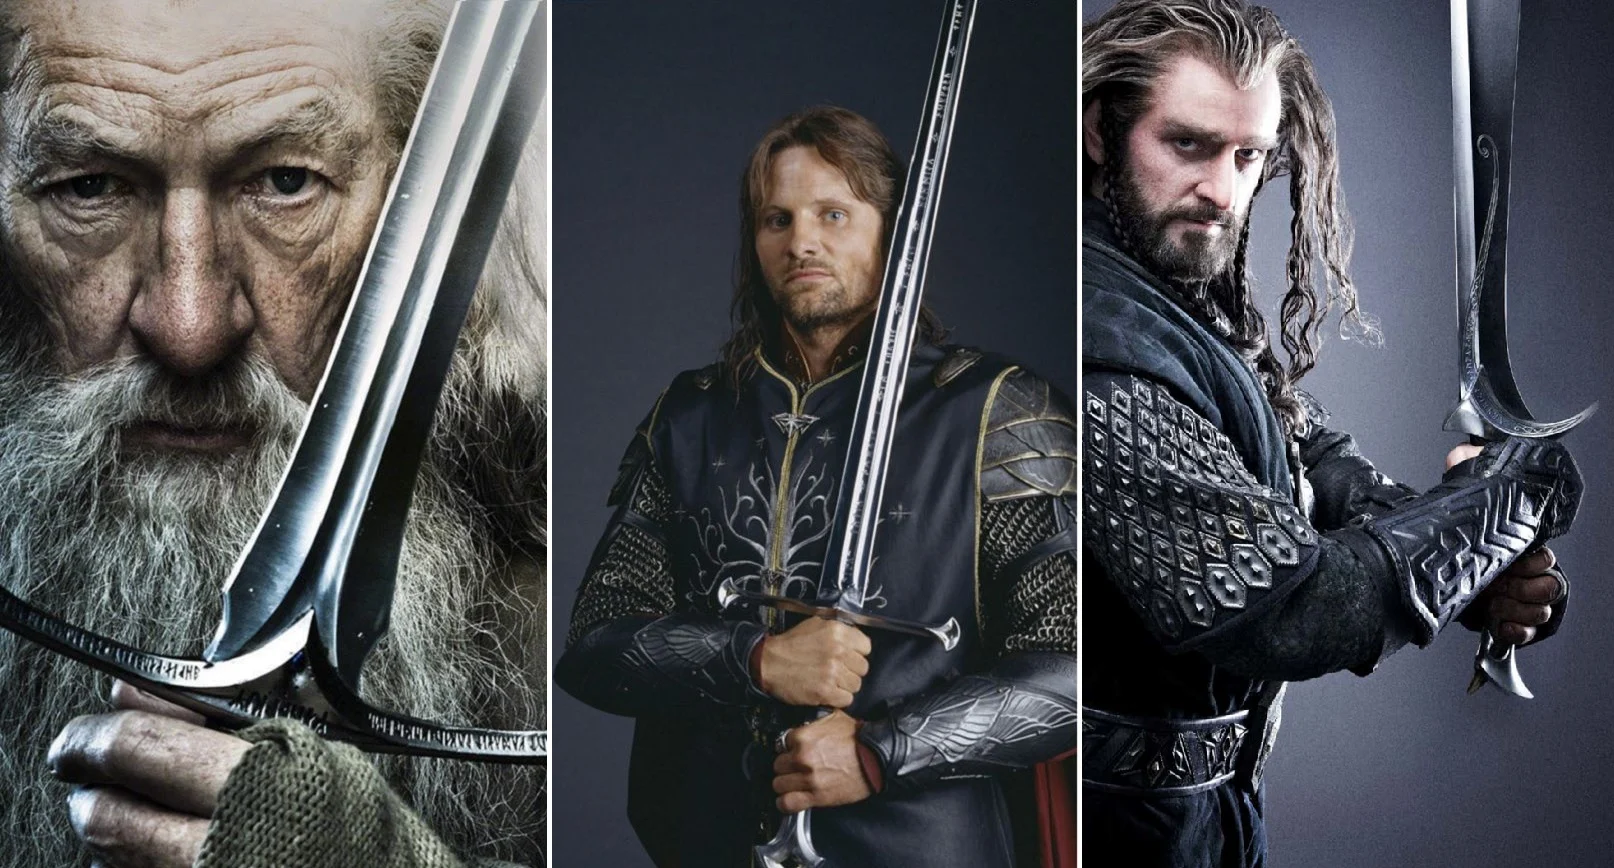 10 Most Powerful Weapons in The Lord of the Rings